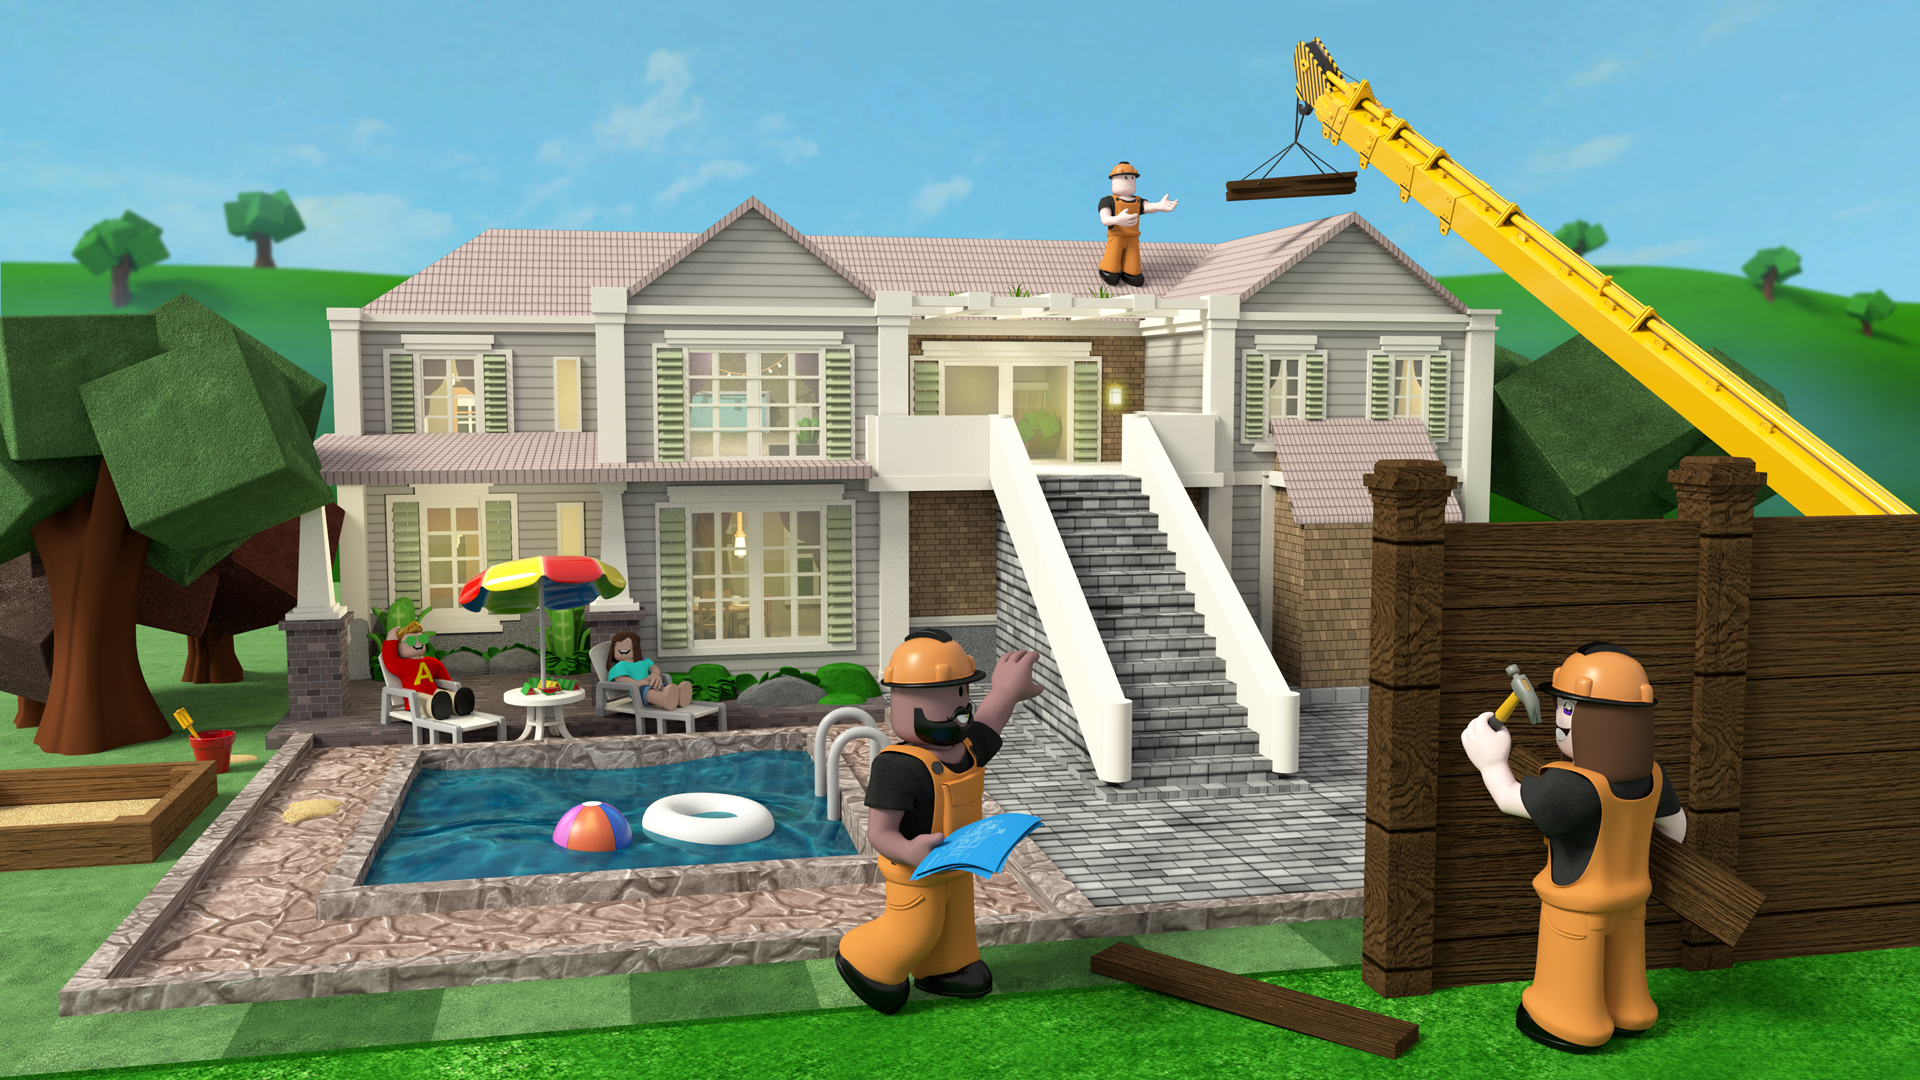 An Inside Look At Roblox The Gaming Universe That S Exploded To 164 000 000 Users By Spero Ventures Spero Ventures Sep 2020 Medium - kuso roblox medium